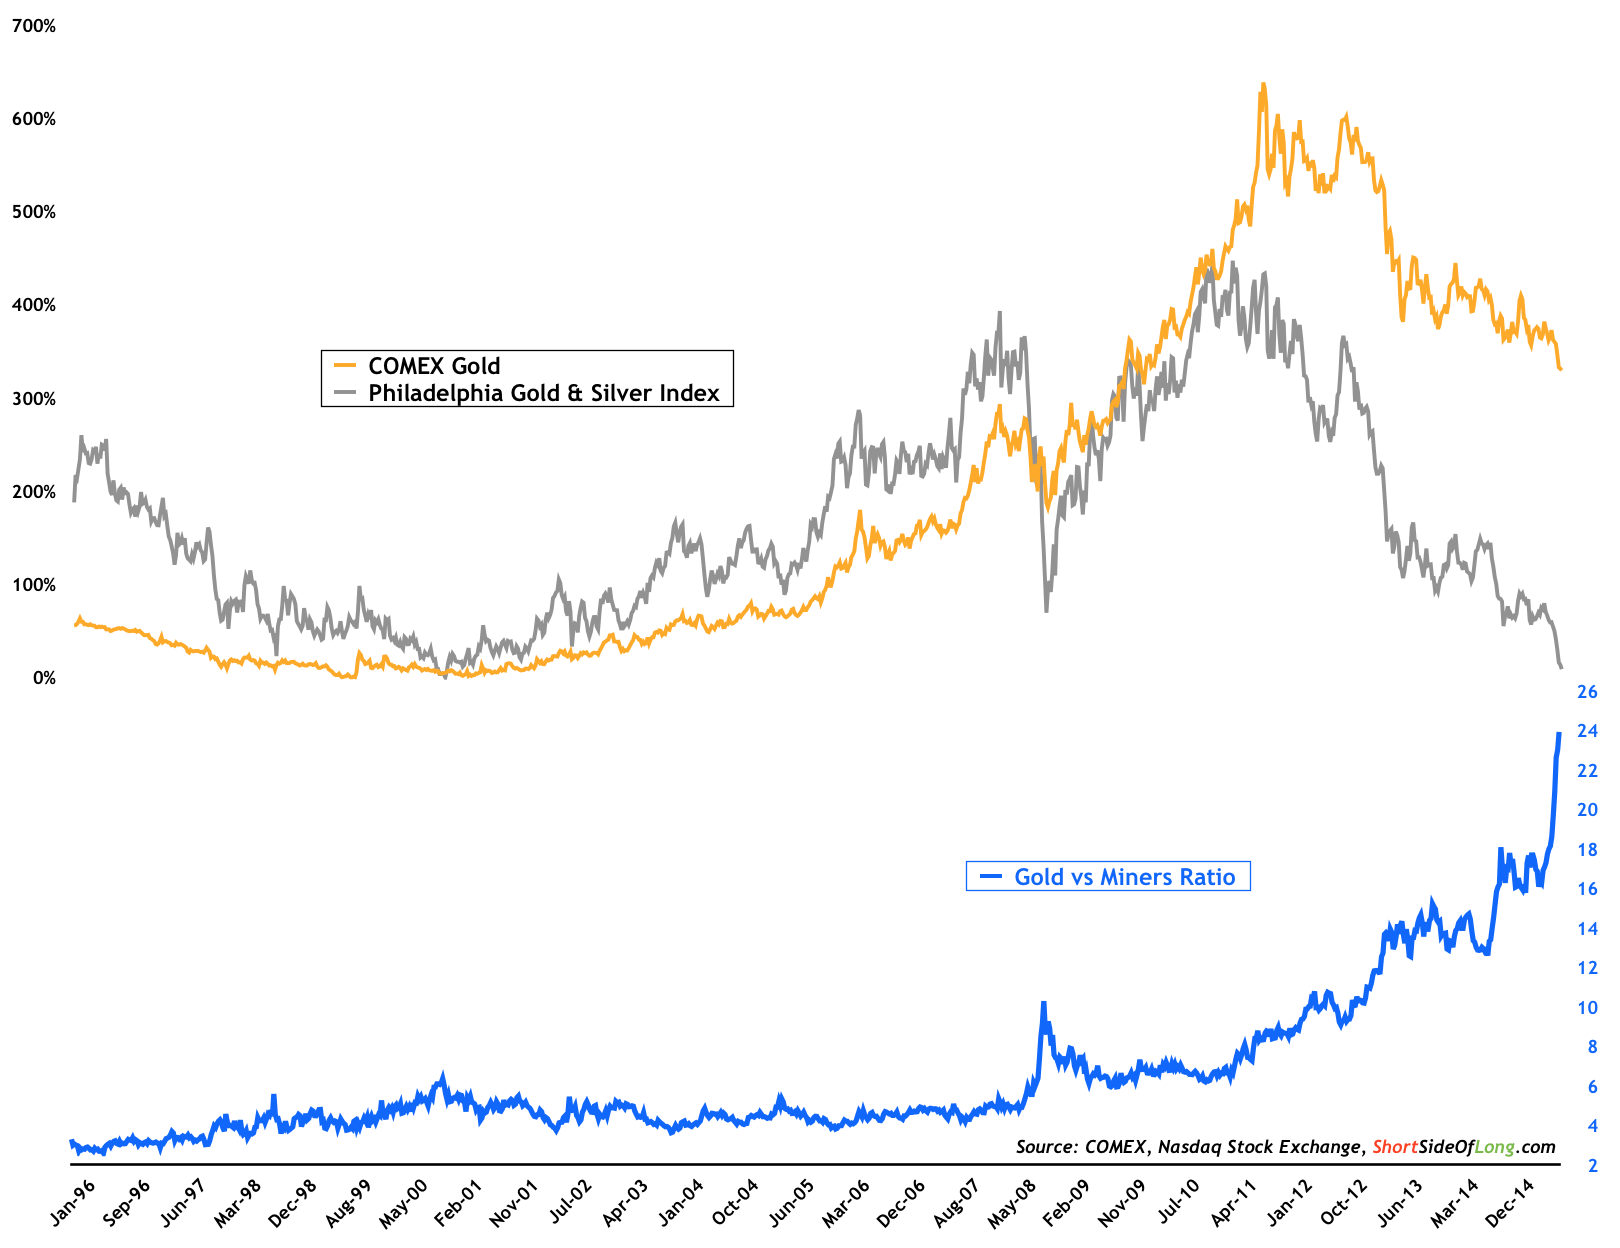 COMEX Gold vs Gold/Silver Index and Gold vs Miners Ratio